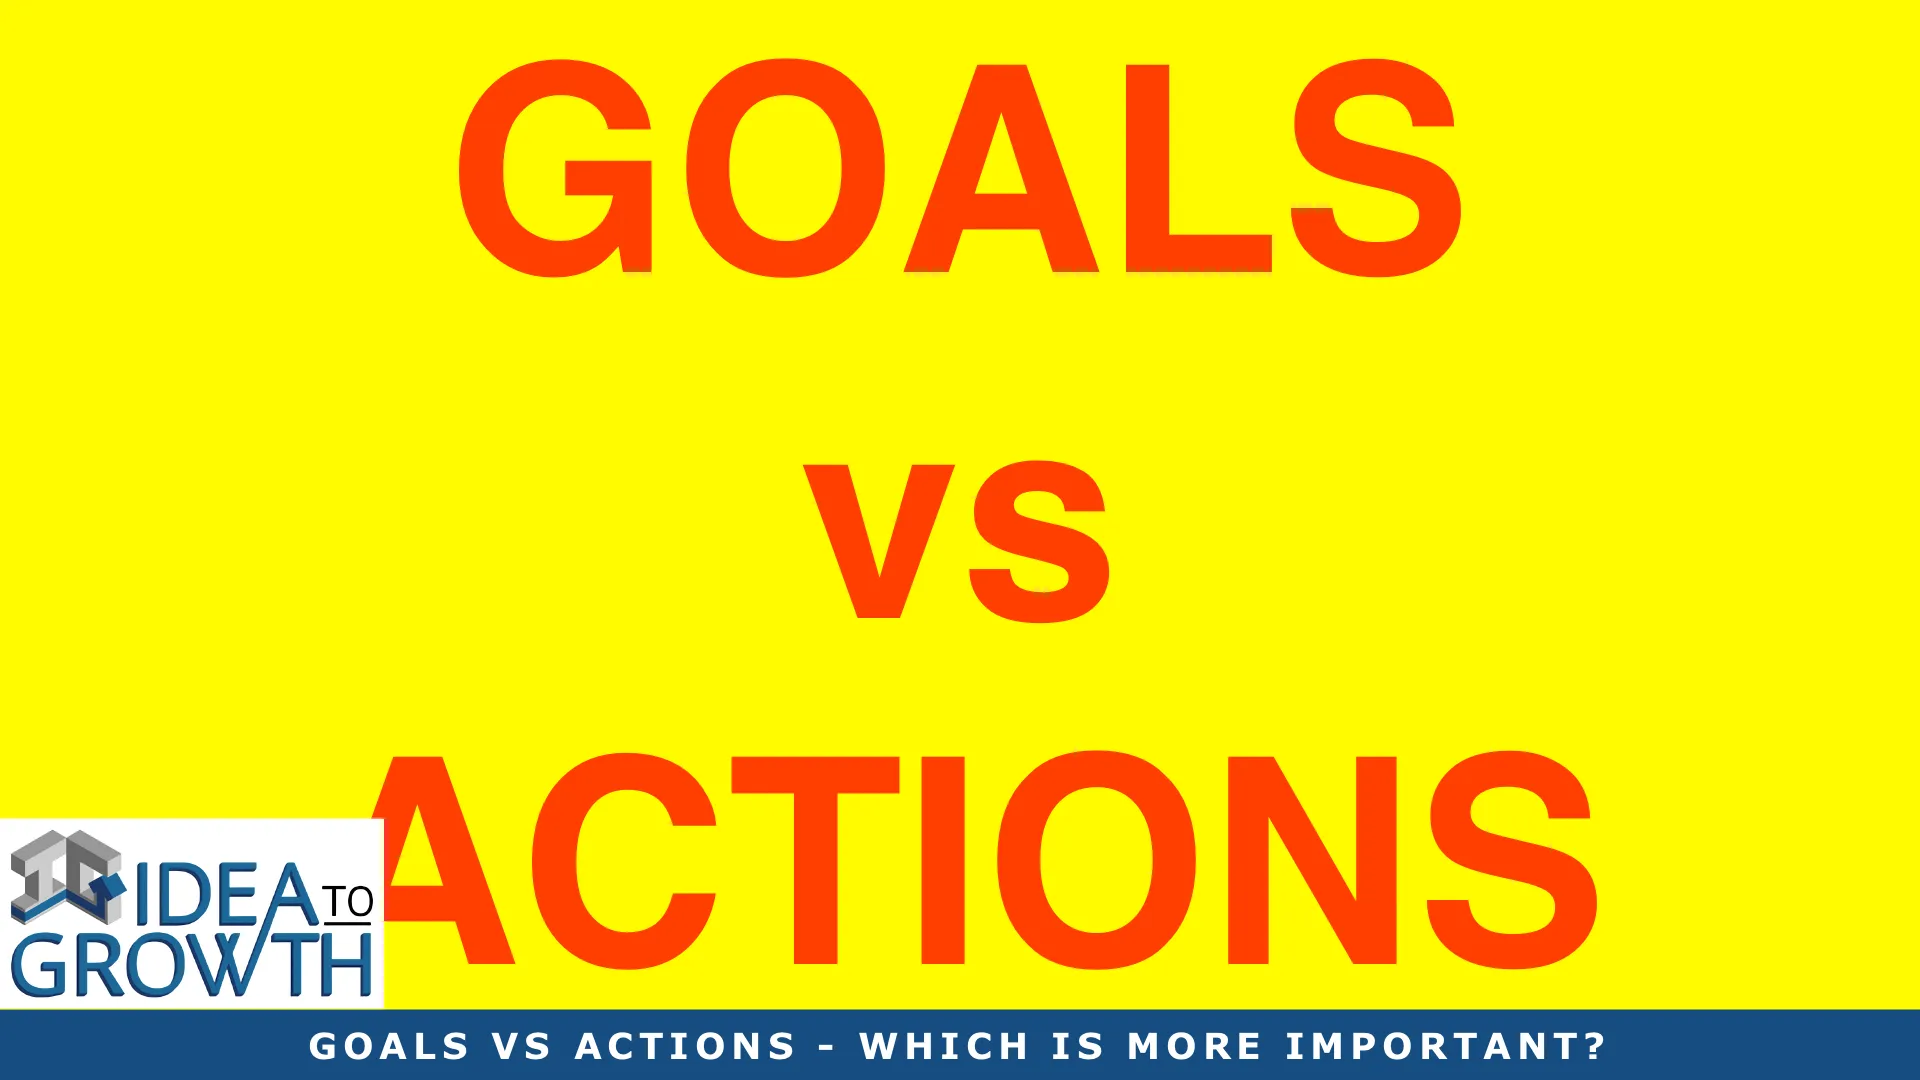 GOALS VS ACTIONS - WHICH IS MORE IMPORTANT